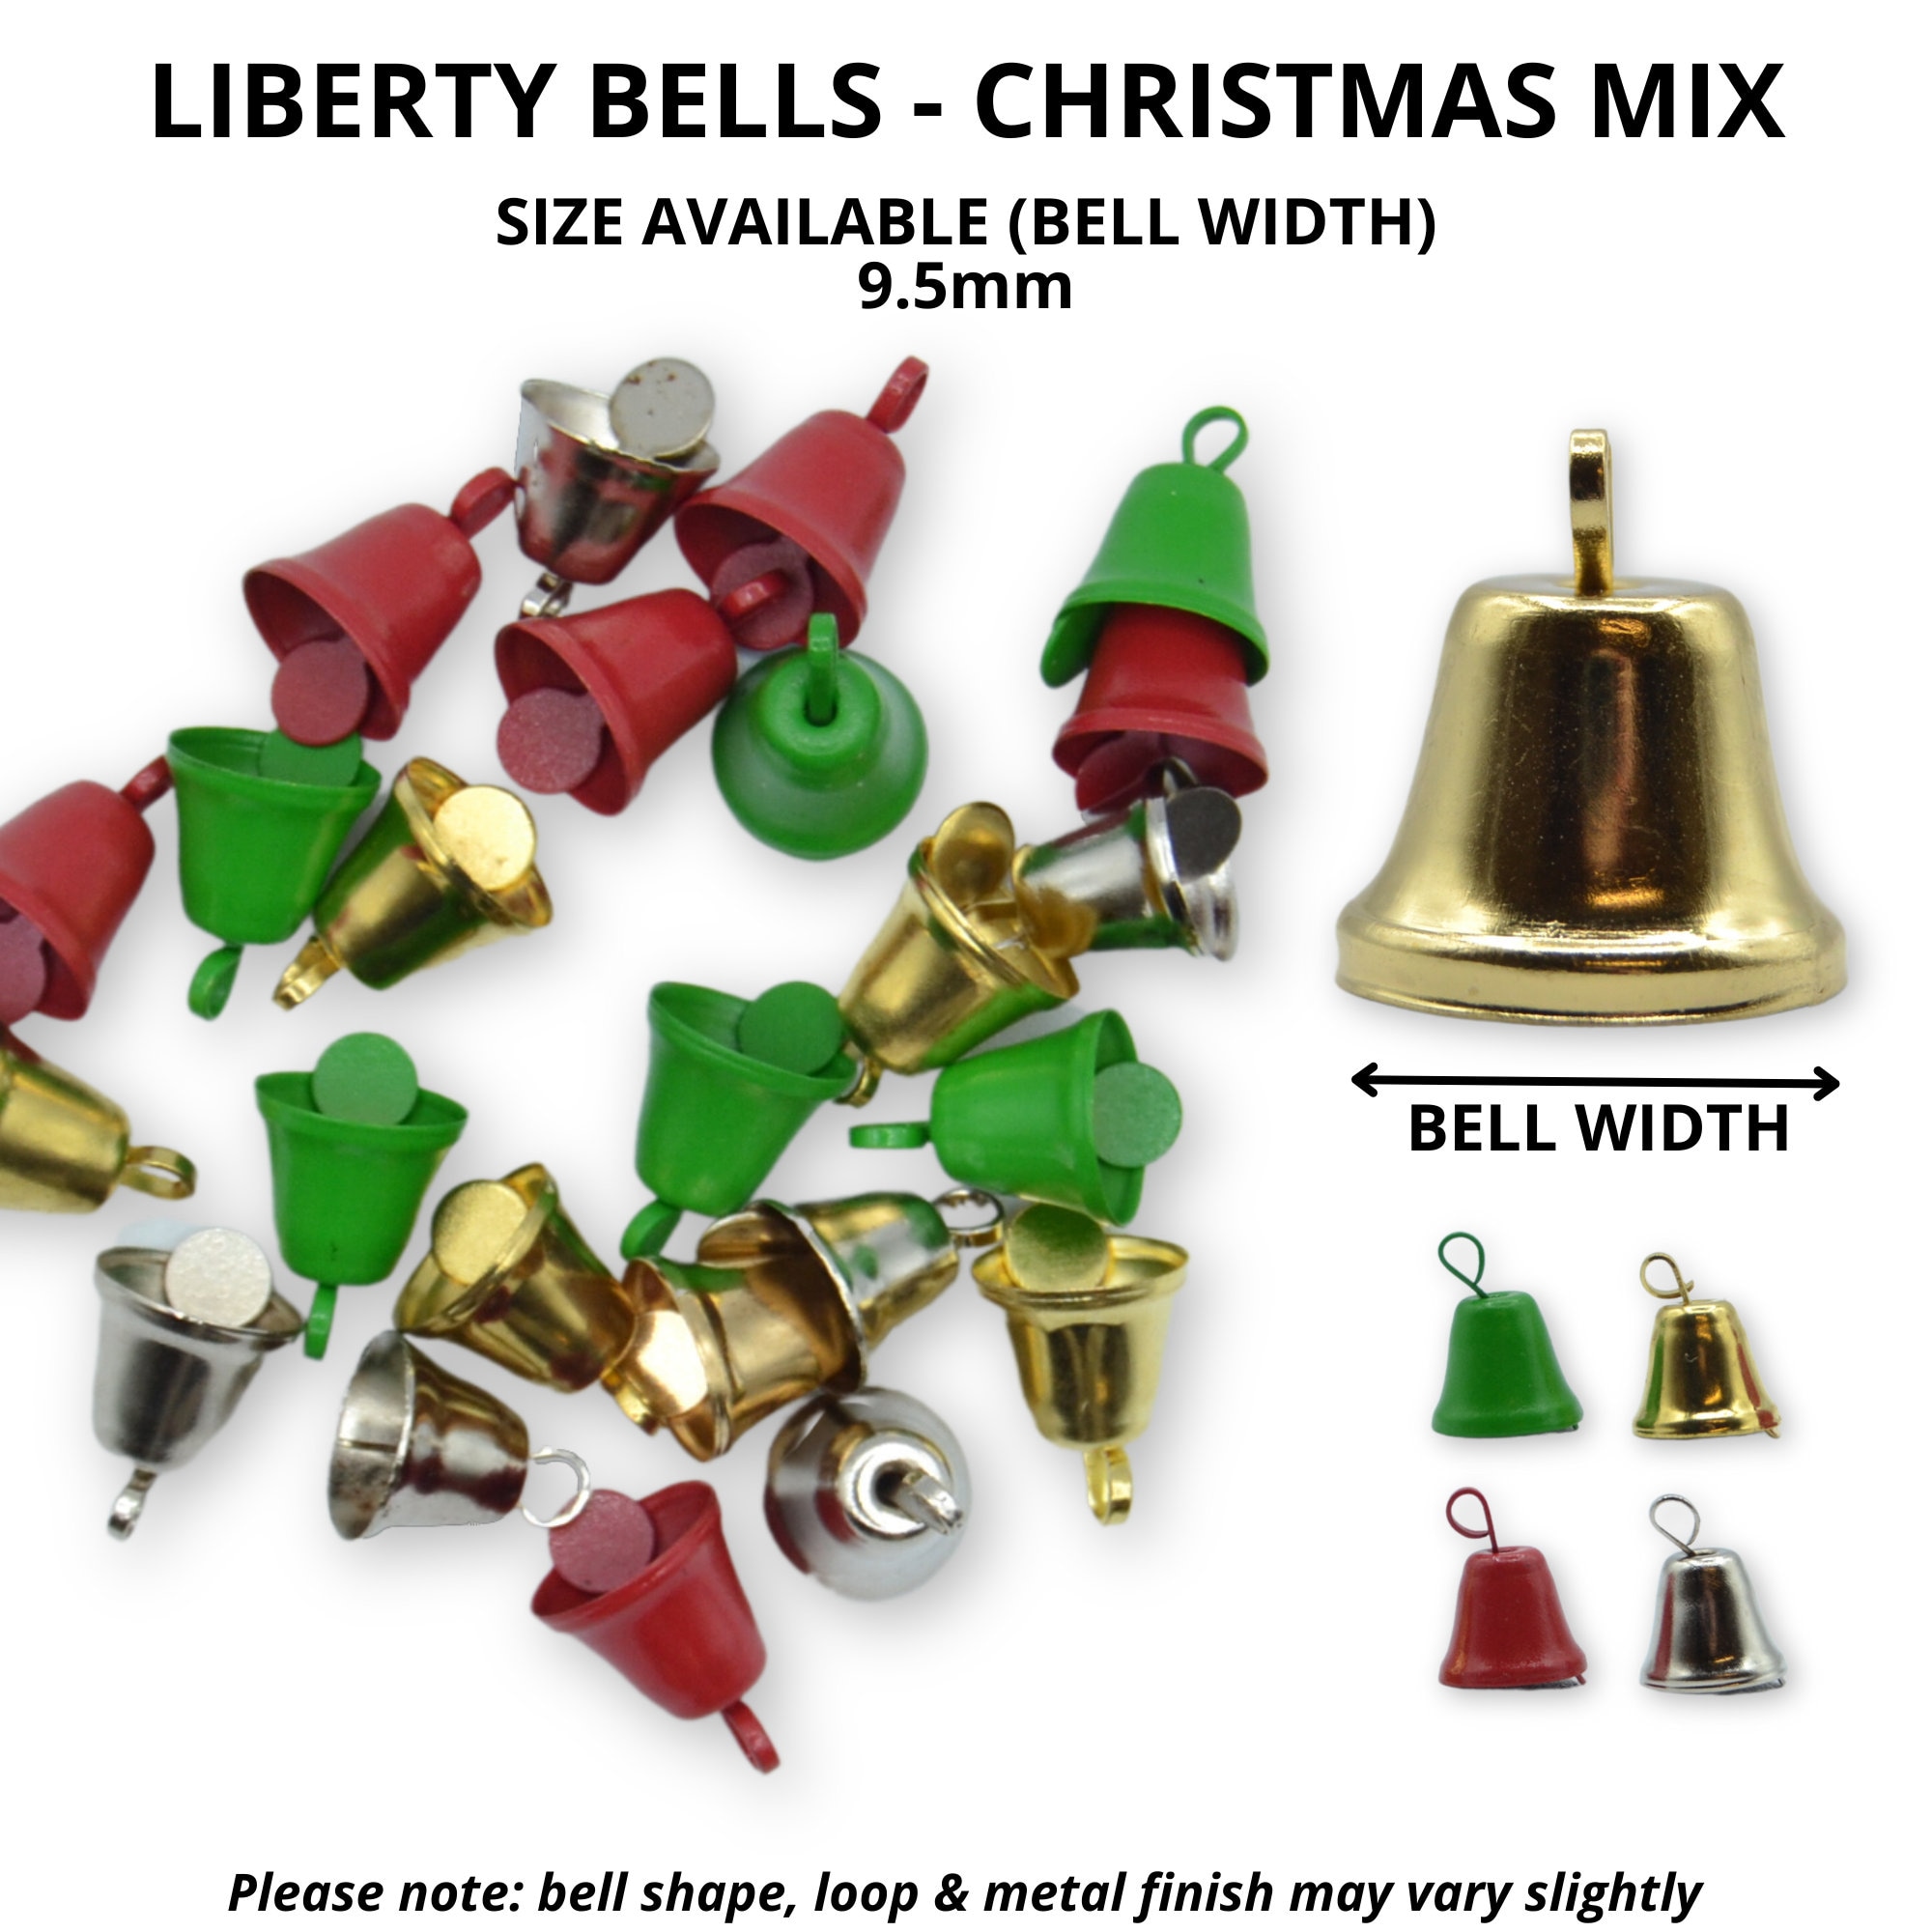 Factory Direct Craft Package of 48 Mini Shiny Gold Metal Liberty Bells for  Crafting, Favors, Weddings and Christmas Holiday Decorating